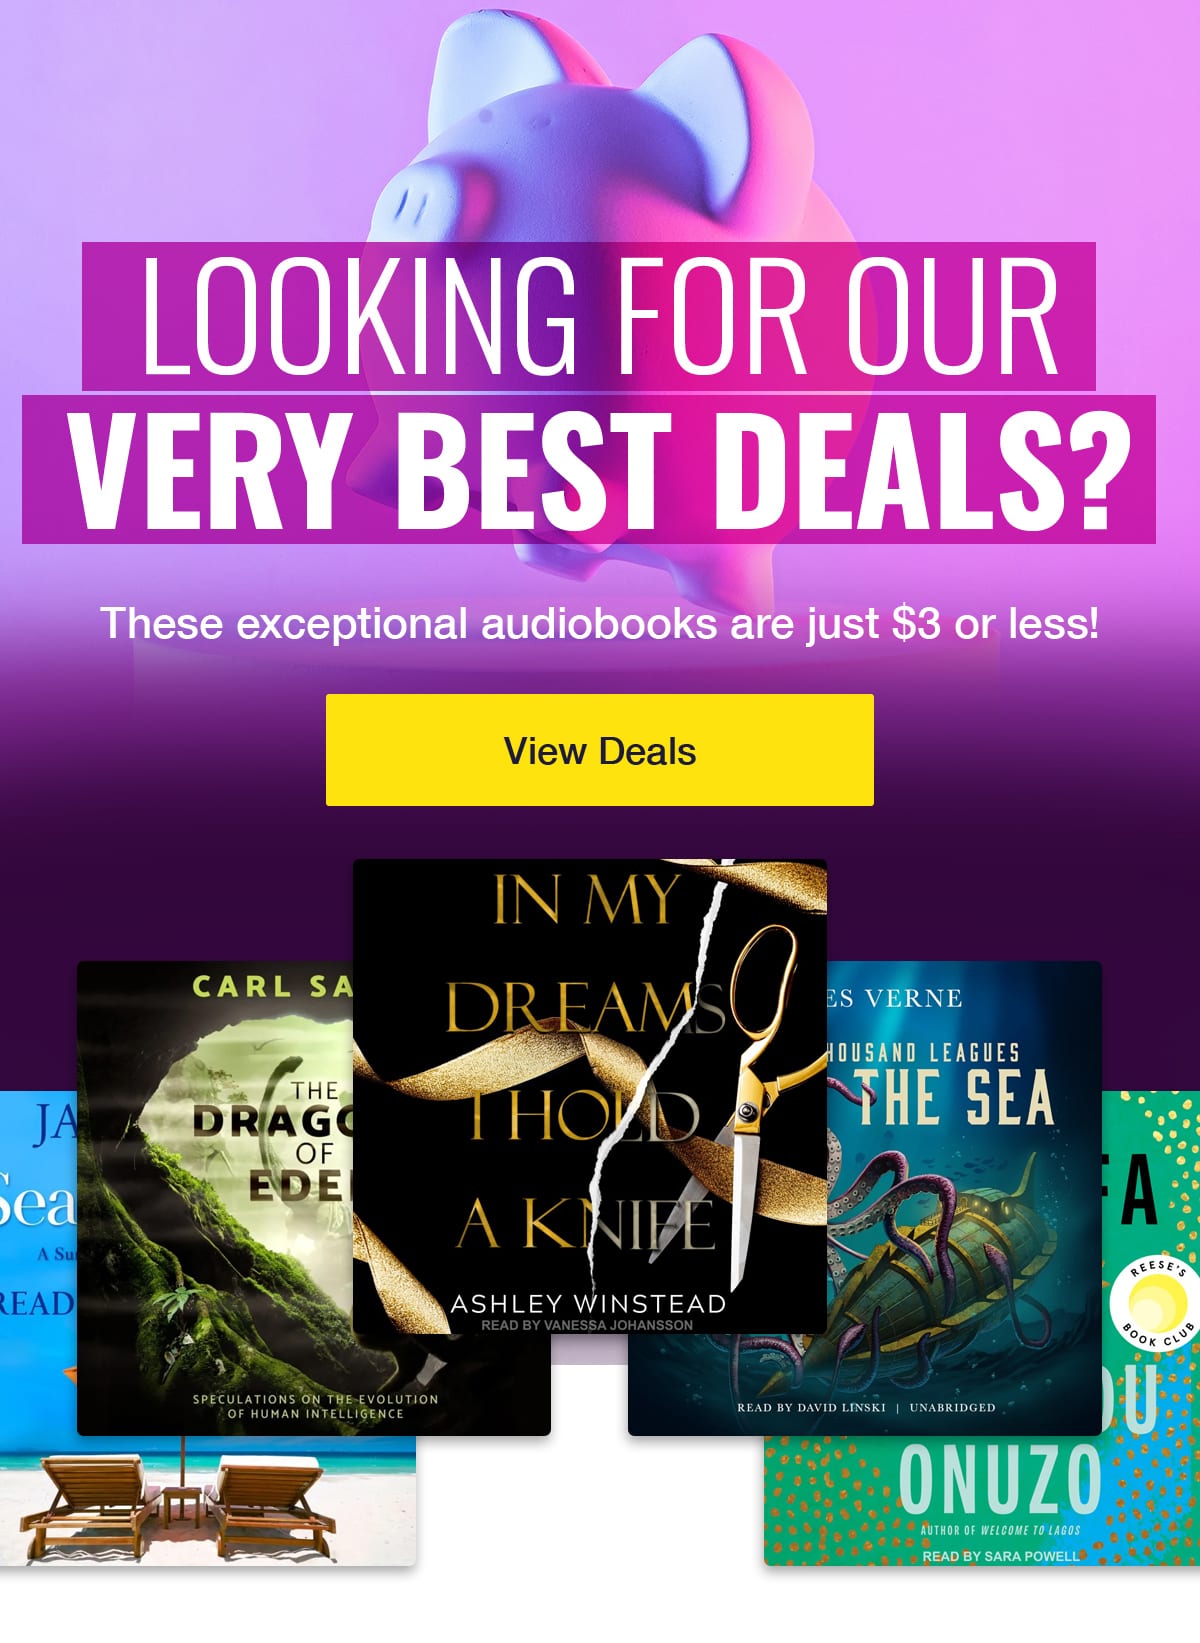 Audiobook Deals for $3 or Less